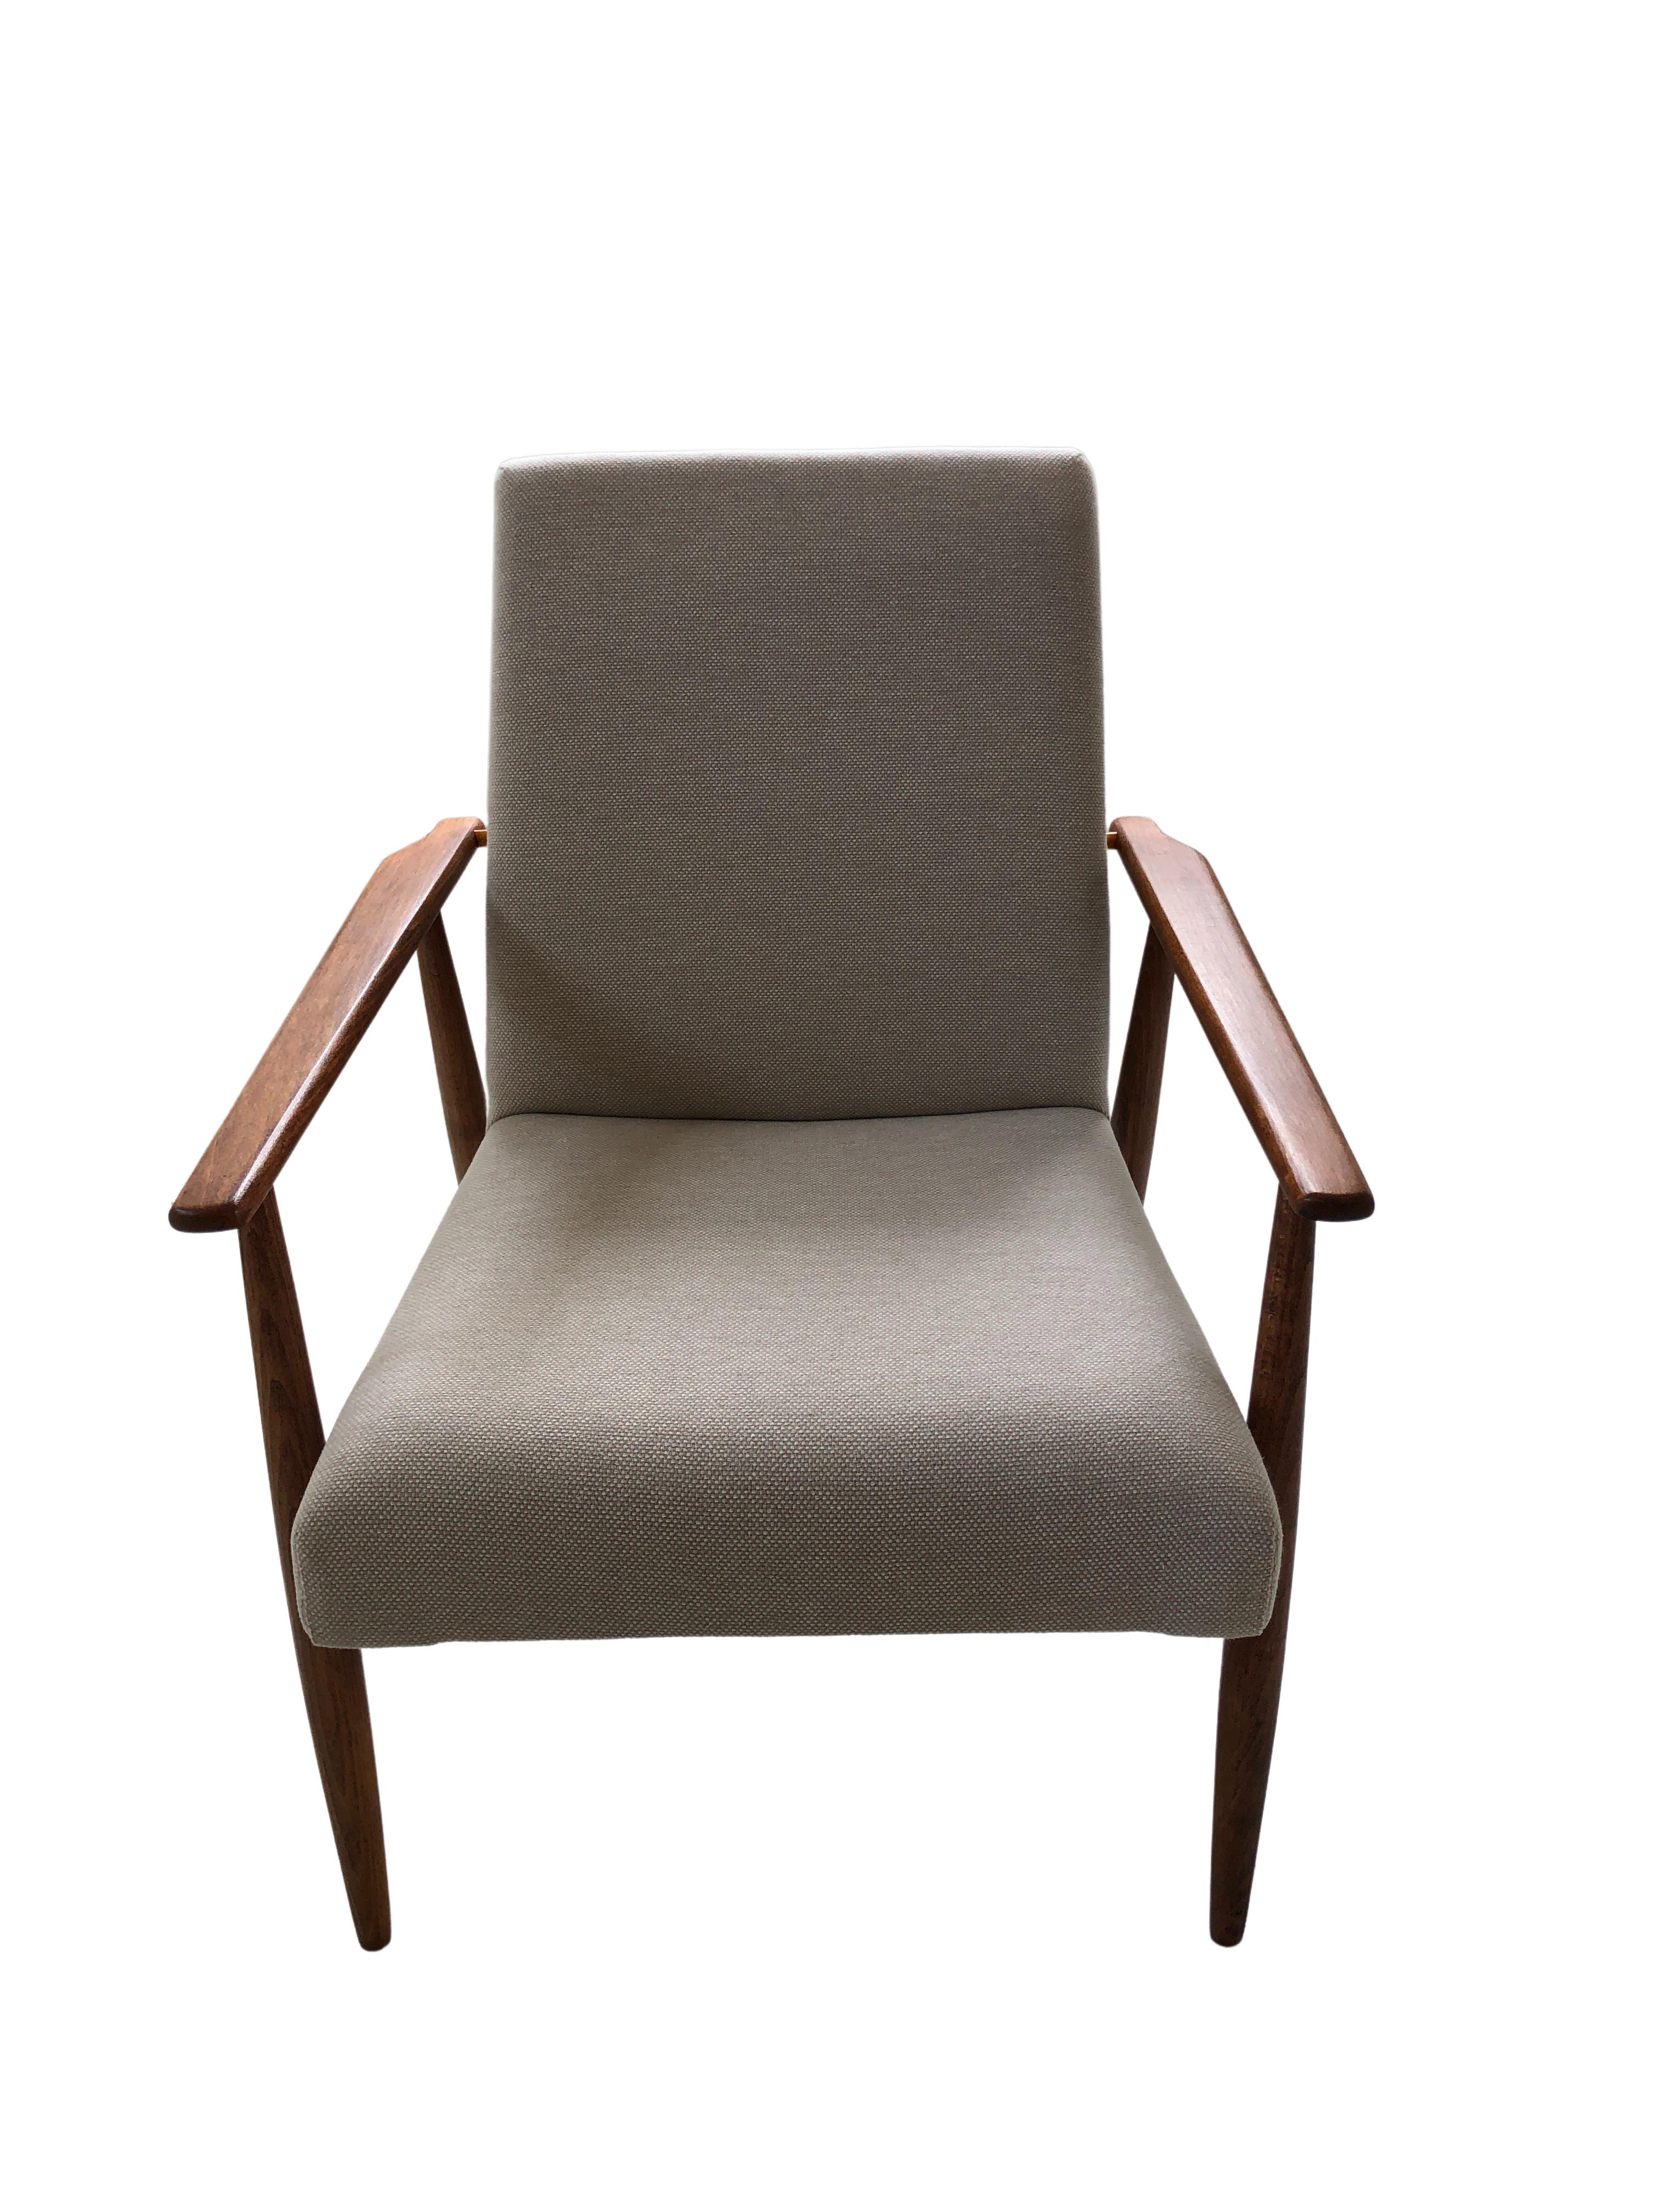 Polish Midcentury Armchair by Henryk Lis in Beige Cotton Linen Upholstery, 1960s For Sale